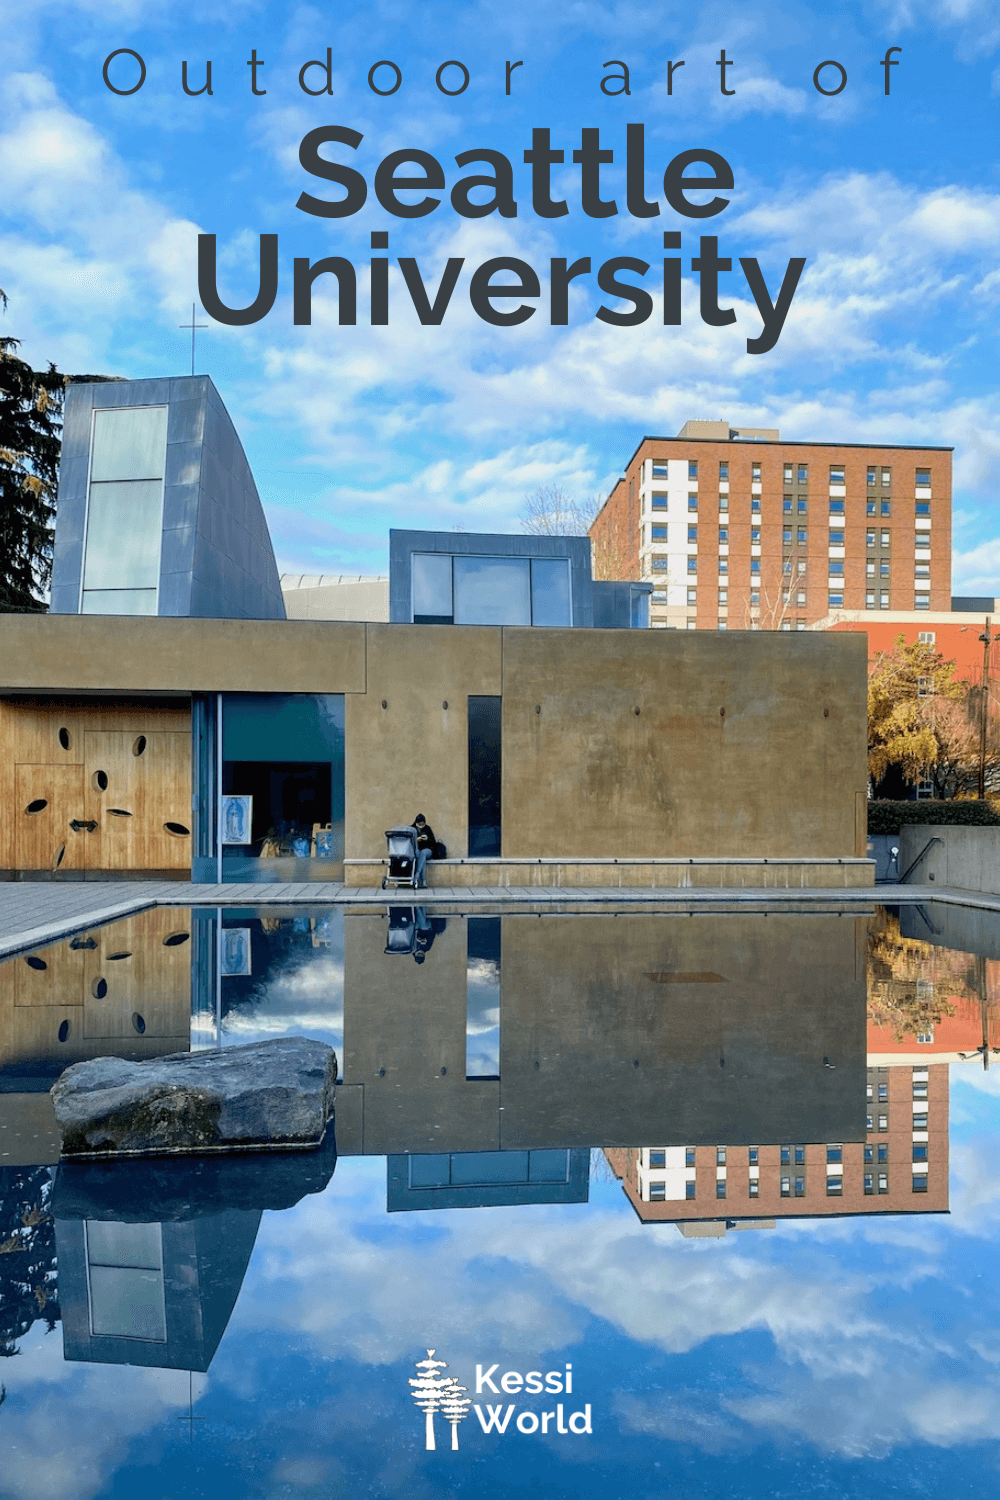 This Pinterest pin shows The Chapel of St. Ignatius on the campus of Seattle University offers a unique architecture with a variety of geometrical shapes towering over a rectangular reflection pool.